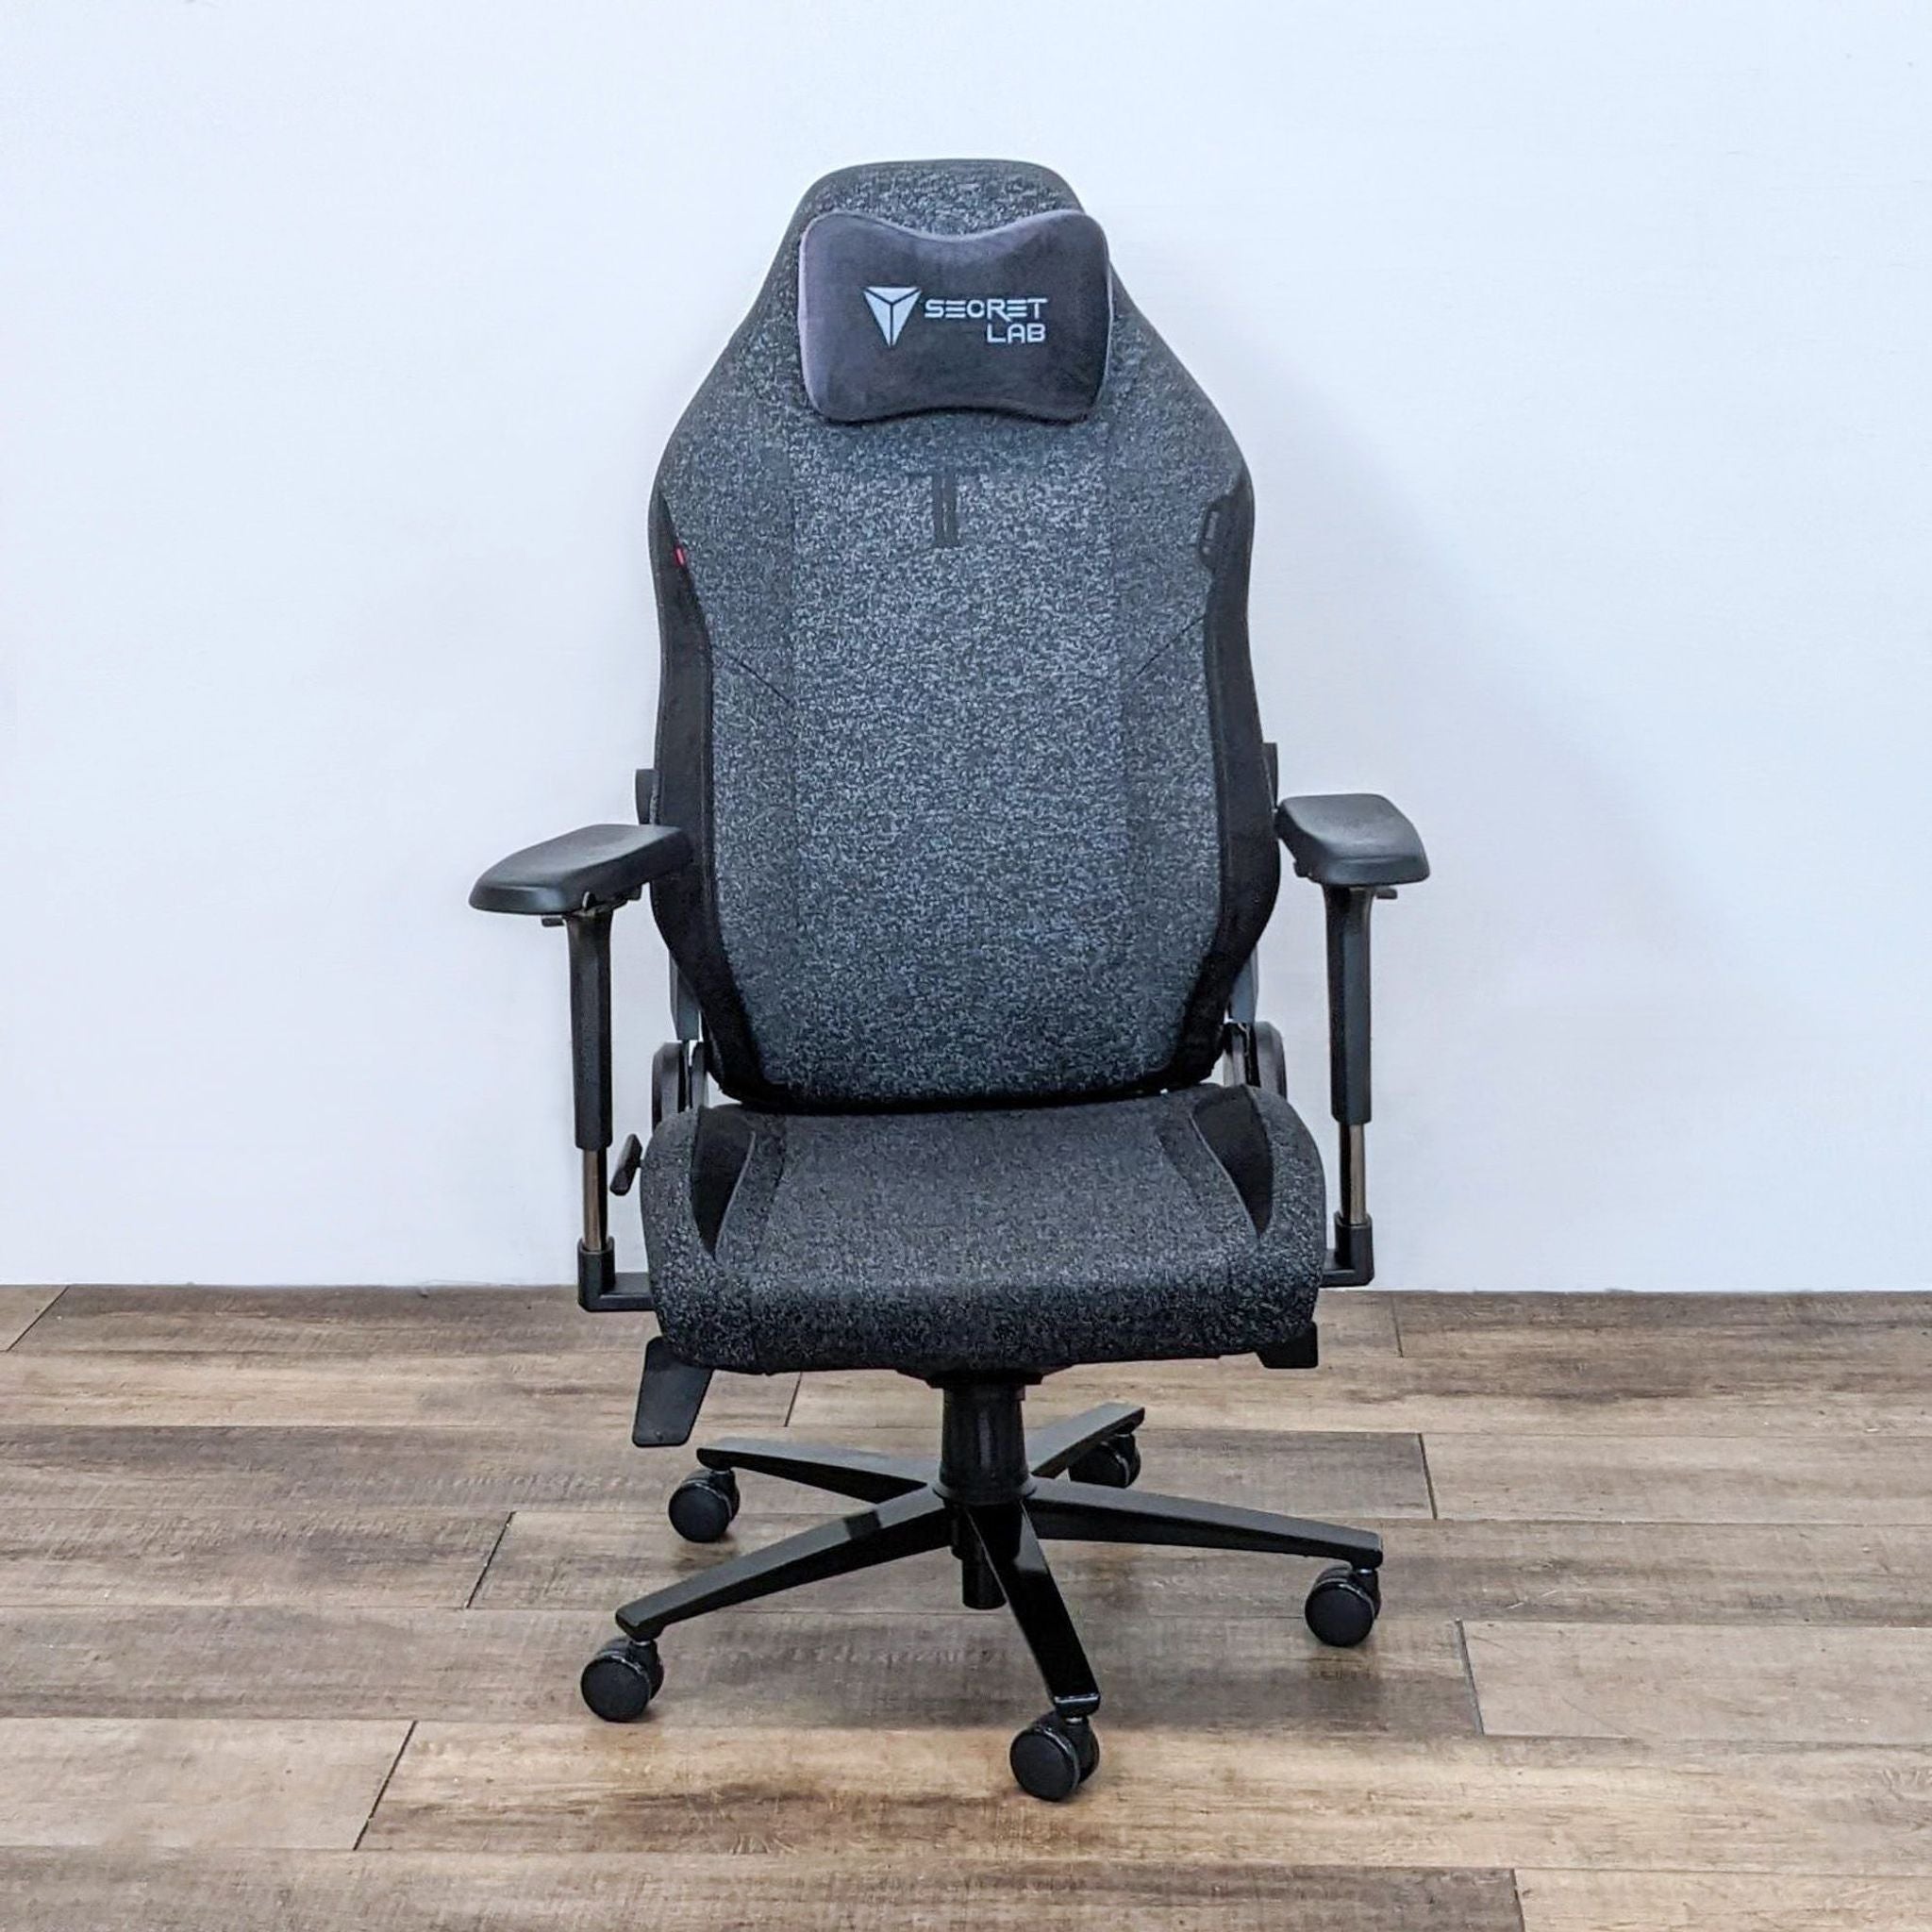 Alt text 1: Secretlab Titan Evo gaming chair in gray with cold-cure foam, recline function, and a memory foam pillow.